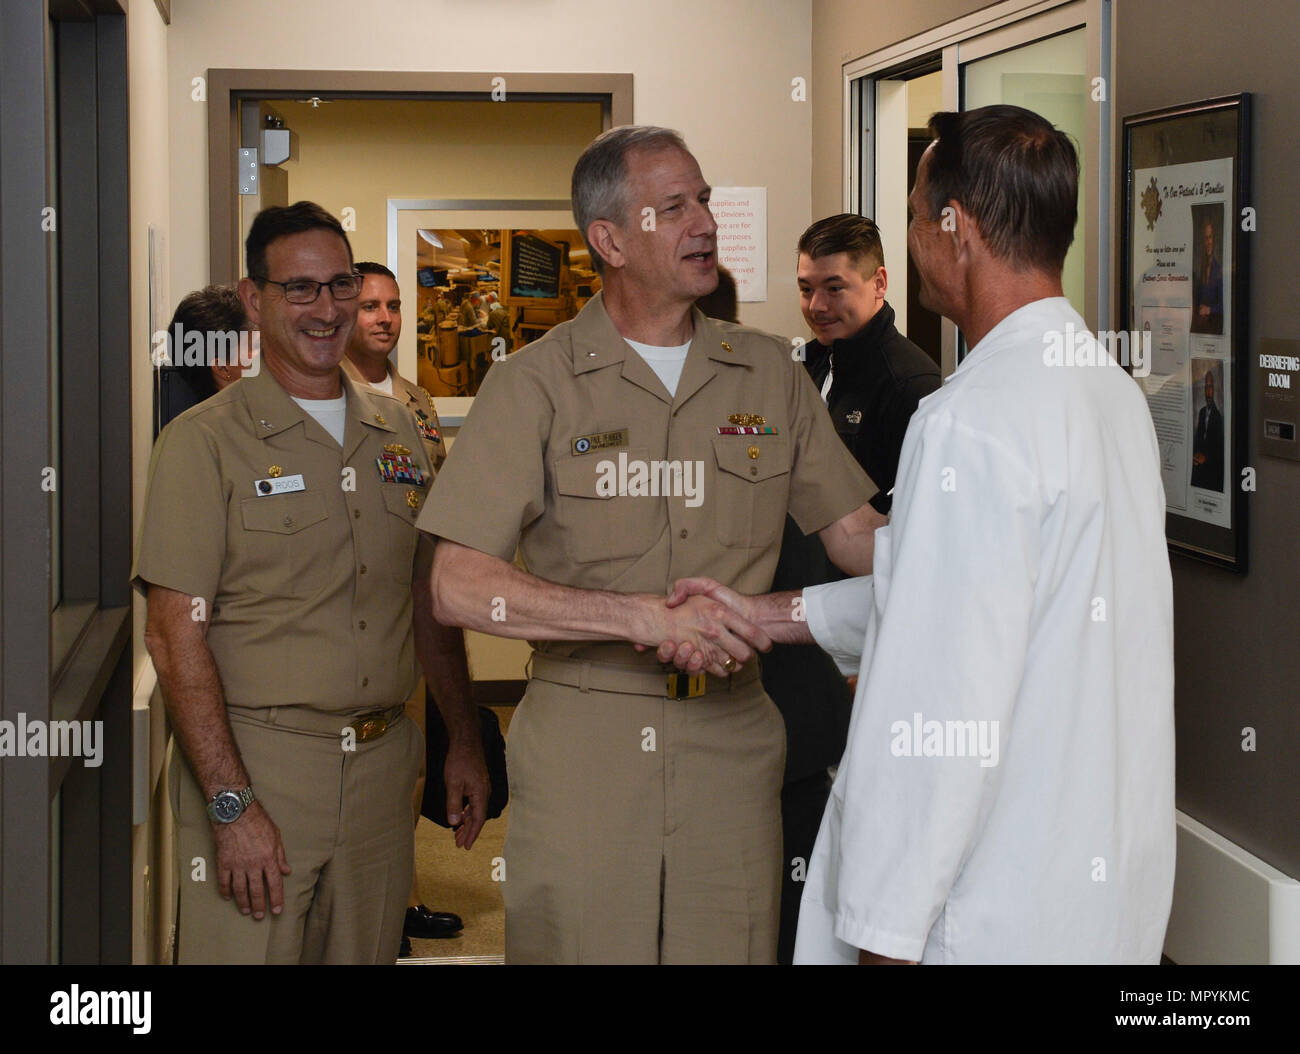 170424-N-MD713-013 SAN DIEGO (April 24, 2017) Dr. Kerry King (right), medical director, Naval Medical Center San Diego (NMCSD) Surgical Simulation Center, greets Rear Arm. Paul Pearigen, commander, Navy Medicine West, before touring the training spaces. Pearigen toured NMCSD and visited the Medical and Surgical Sim Center, Bio Skills Training Center and Emergency Department before holding an Admiral’s call and answering Sailors’ questions. (U.S. Navy photo by Mass Communication Specialist Seaman Cameron Pinske/Released) Stock Photo